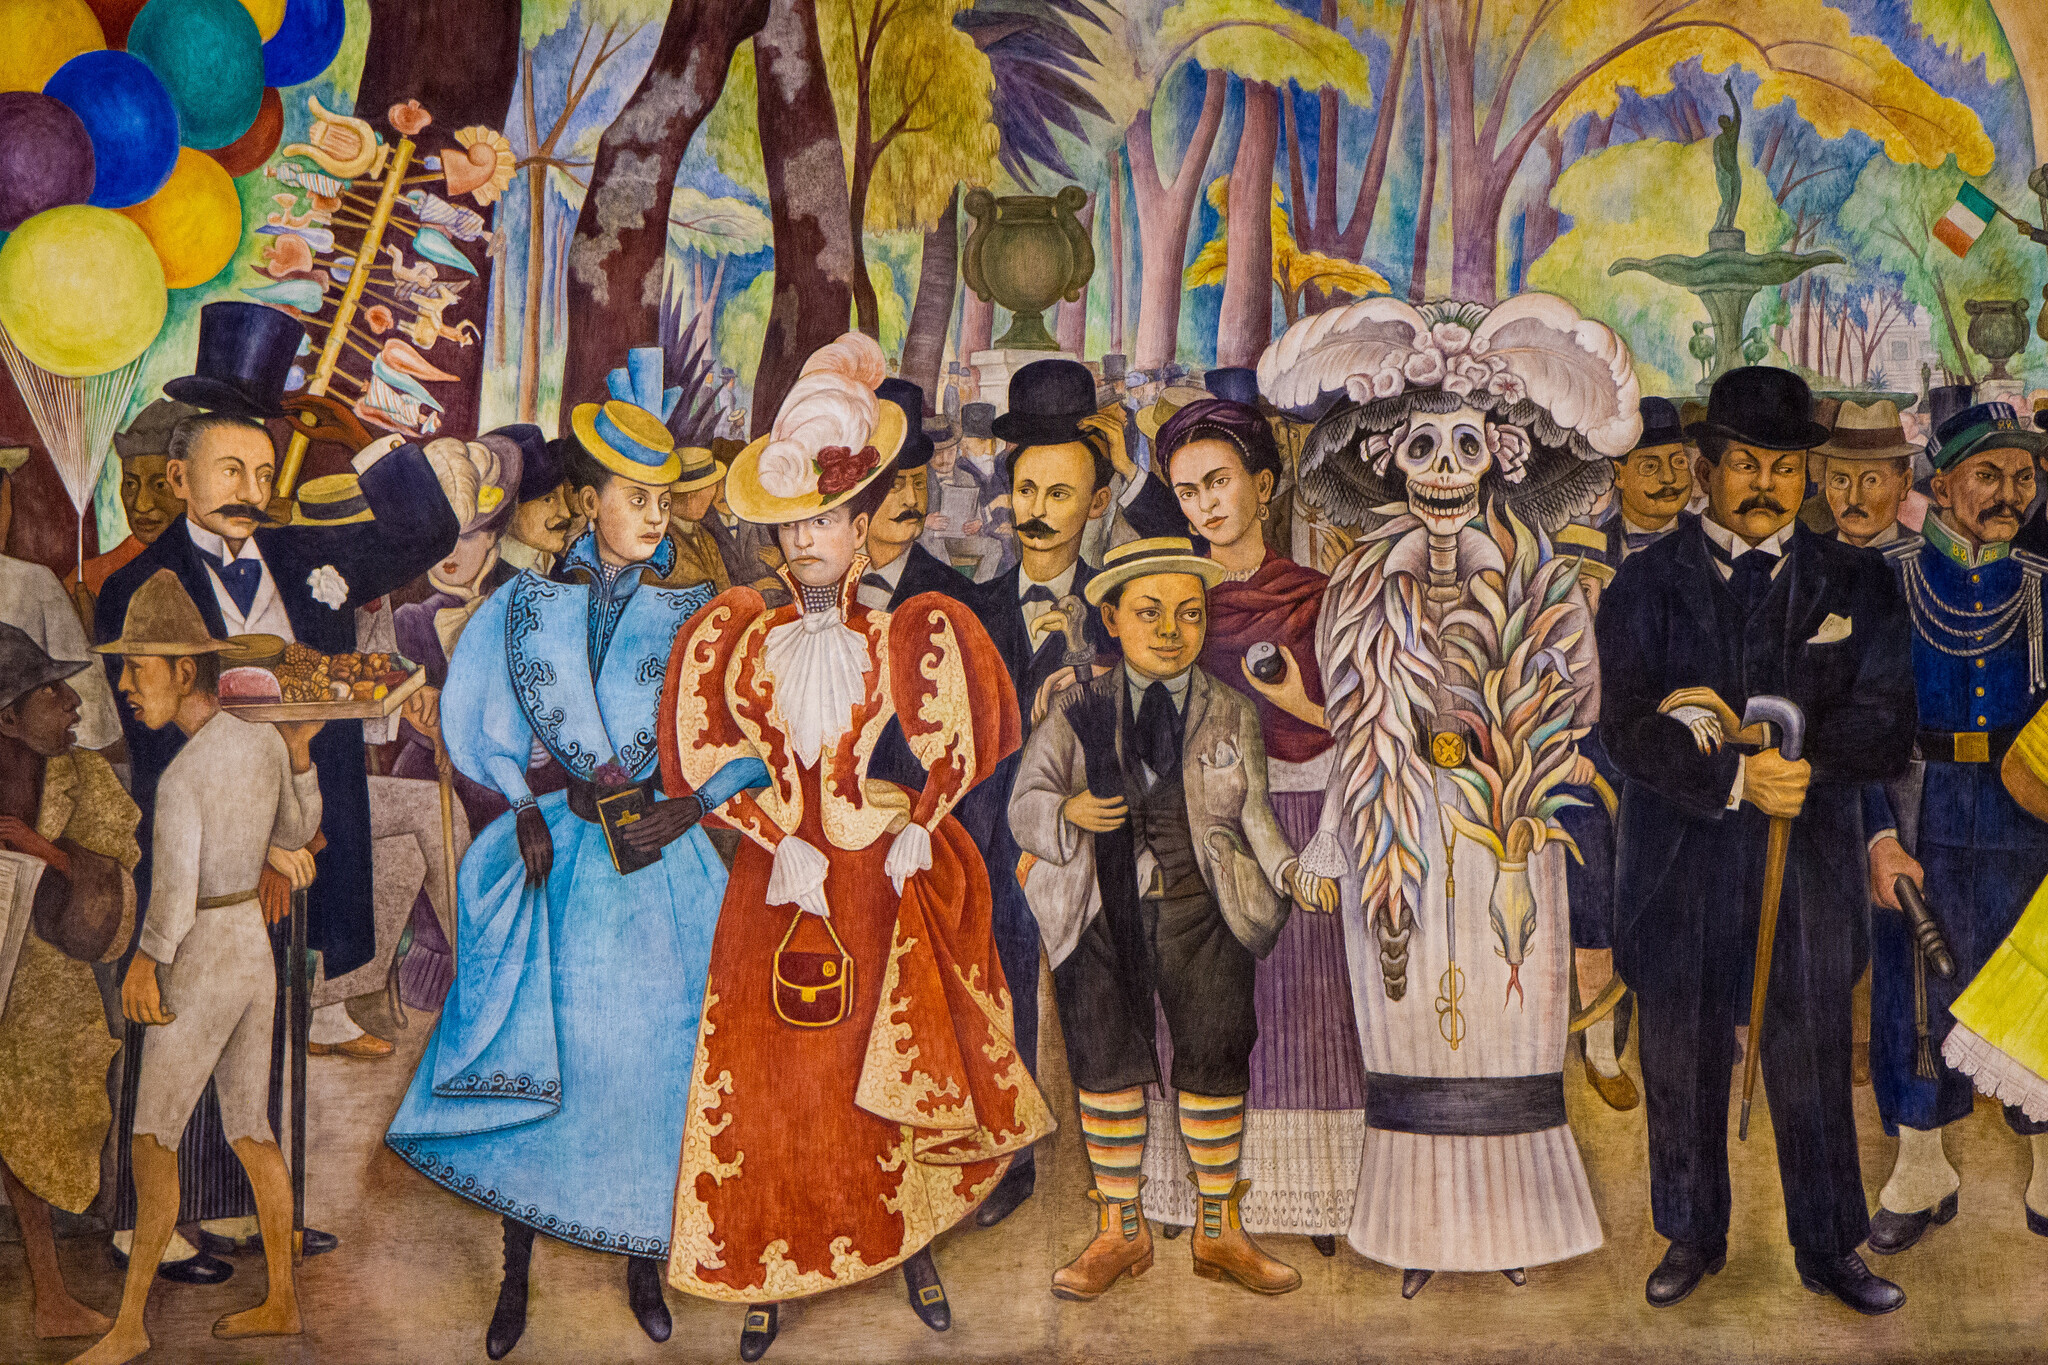 Diego Rivera, detail of central group with four rightmost figures (right to left) being the printmaker José Guadalupe Posada (right), La Catrina (the Skeleton), the painter Frida Kahlo (behind La Catrina), and the artist as a young man (in front of Kahlo), Dream of a Sunday Afternoon in Alameda Central Park (Sueño de una tarde dominical en la Alameda Central), 1947, 4.8 x 15 m (Museo Mural Diego Rivera, originally, Hotel del Prado, Mexico City; photo: Garrett Ziegler, CC BY-NC-ND 2.0)